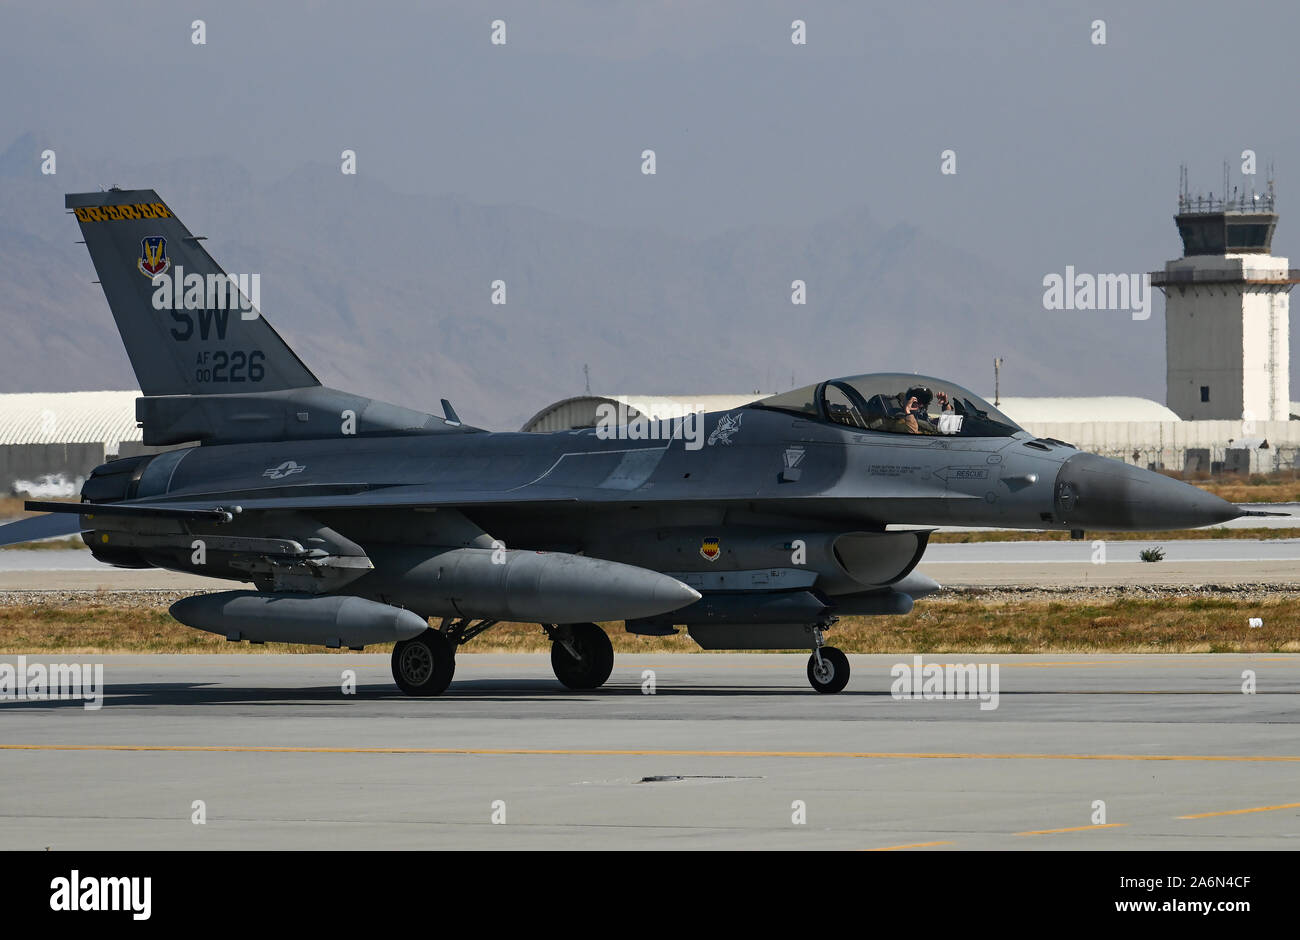 A U.S. Air Force F-16 Fighting Falcon from the 79th Fighter Squadron at Shaw Air Force Base, S.C., arrives at Bagram Airfield, Afghanistan, Oct. 26, 2019. While assigned to the 455th Air Expeditionary Wing at Bagram, the F-16s will help provide decisive airpower through the U.S. Central Command area of responsibility. The airpower the wing provides ensures NATO forces can focus on their mission to train, advise and assist. (U.S. Air Force photo by Staff Sgt. Matthew Lotz) Stock Photo